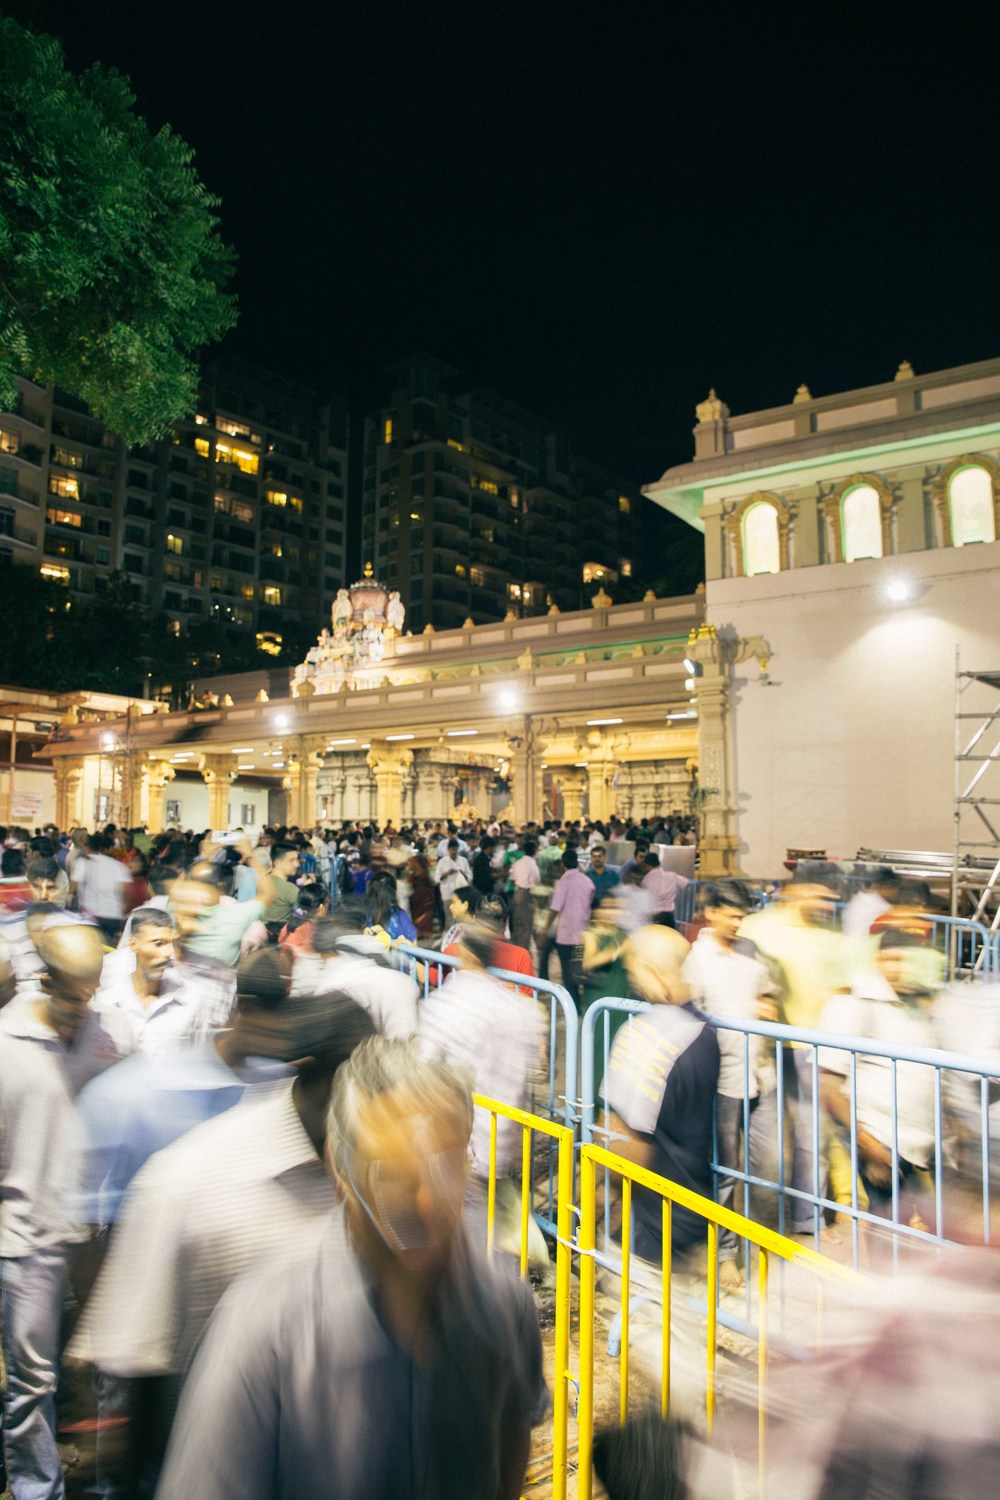  Devotees entering and exiting the temple. 